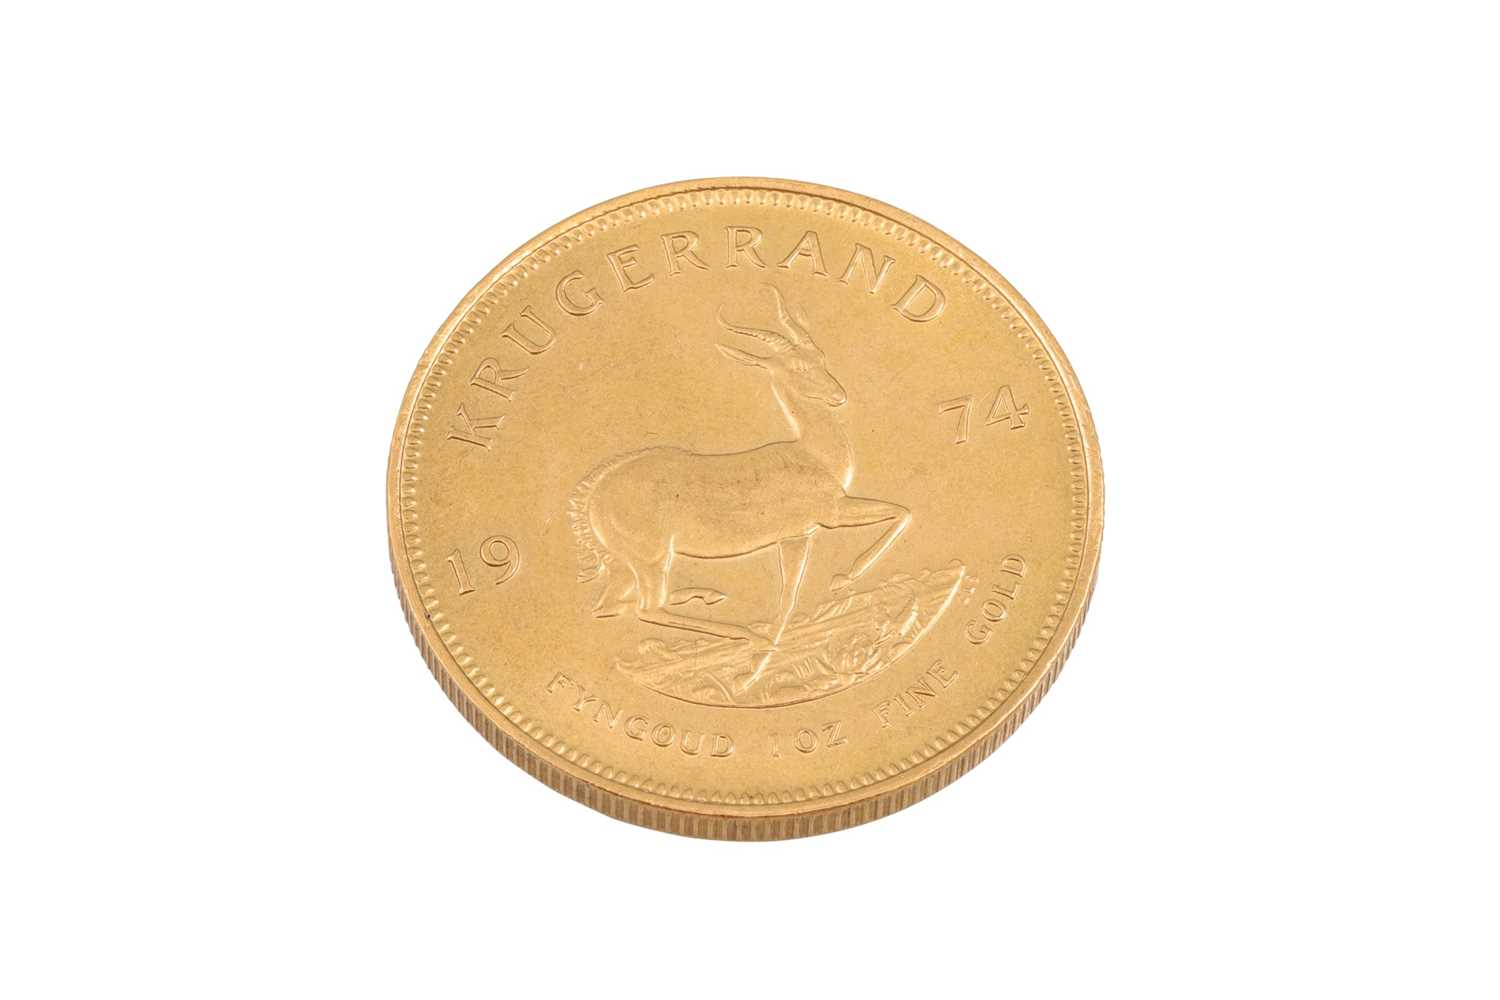 Lot 469 - A 1974 1 TROY KRUGERRAND GOLD COIN, 31.1 g....